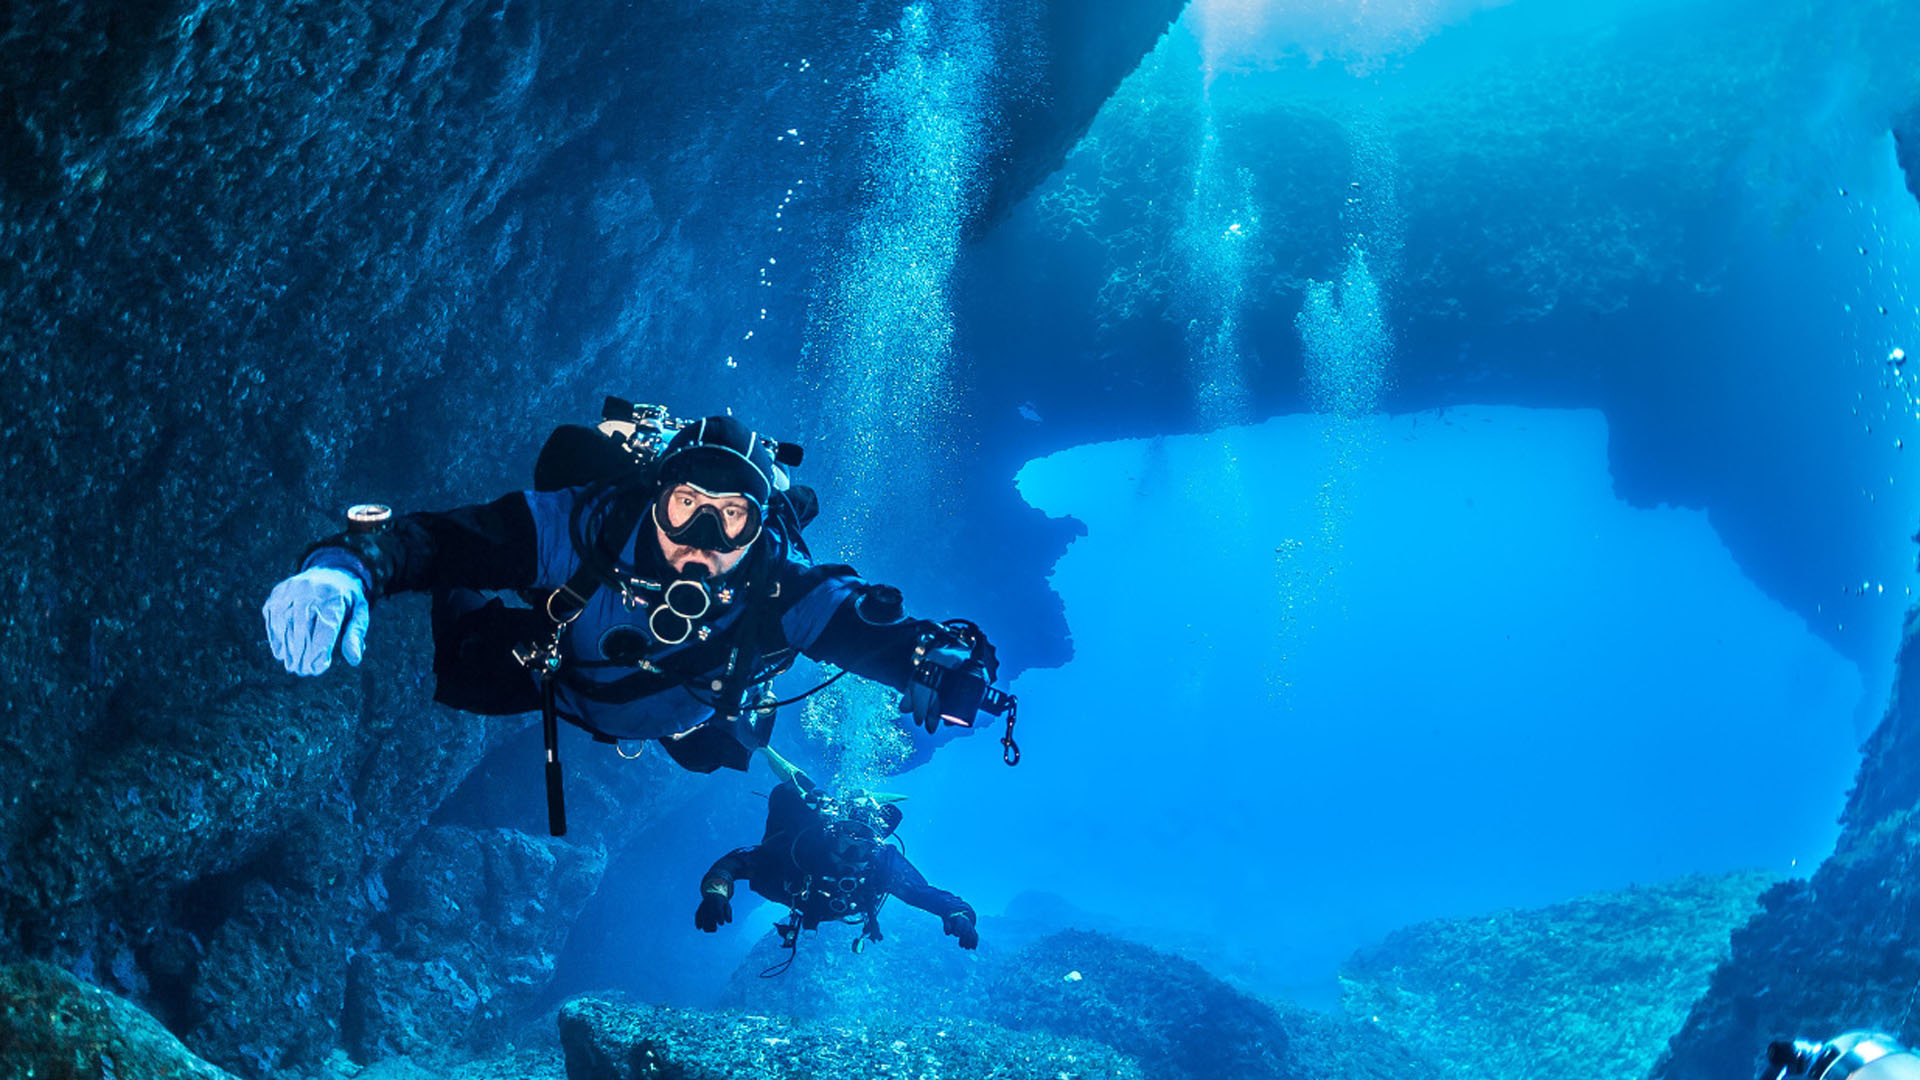 Diving: Divers explore a flooded cave system in Greece, Extreme underwater activity. 1920x1080 Full HD Background.